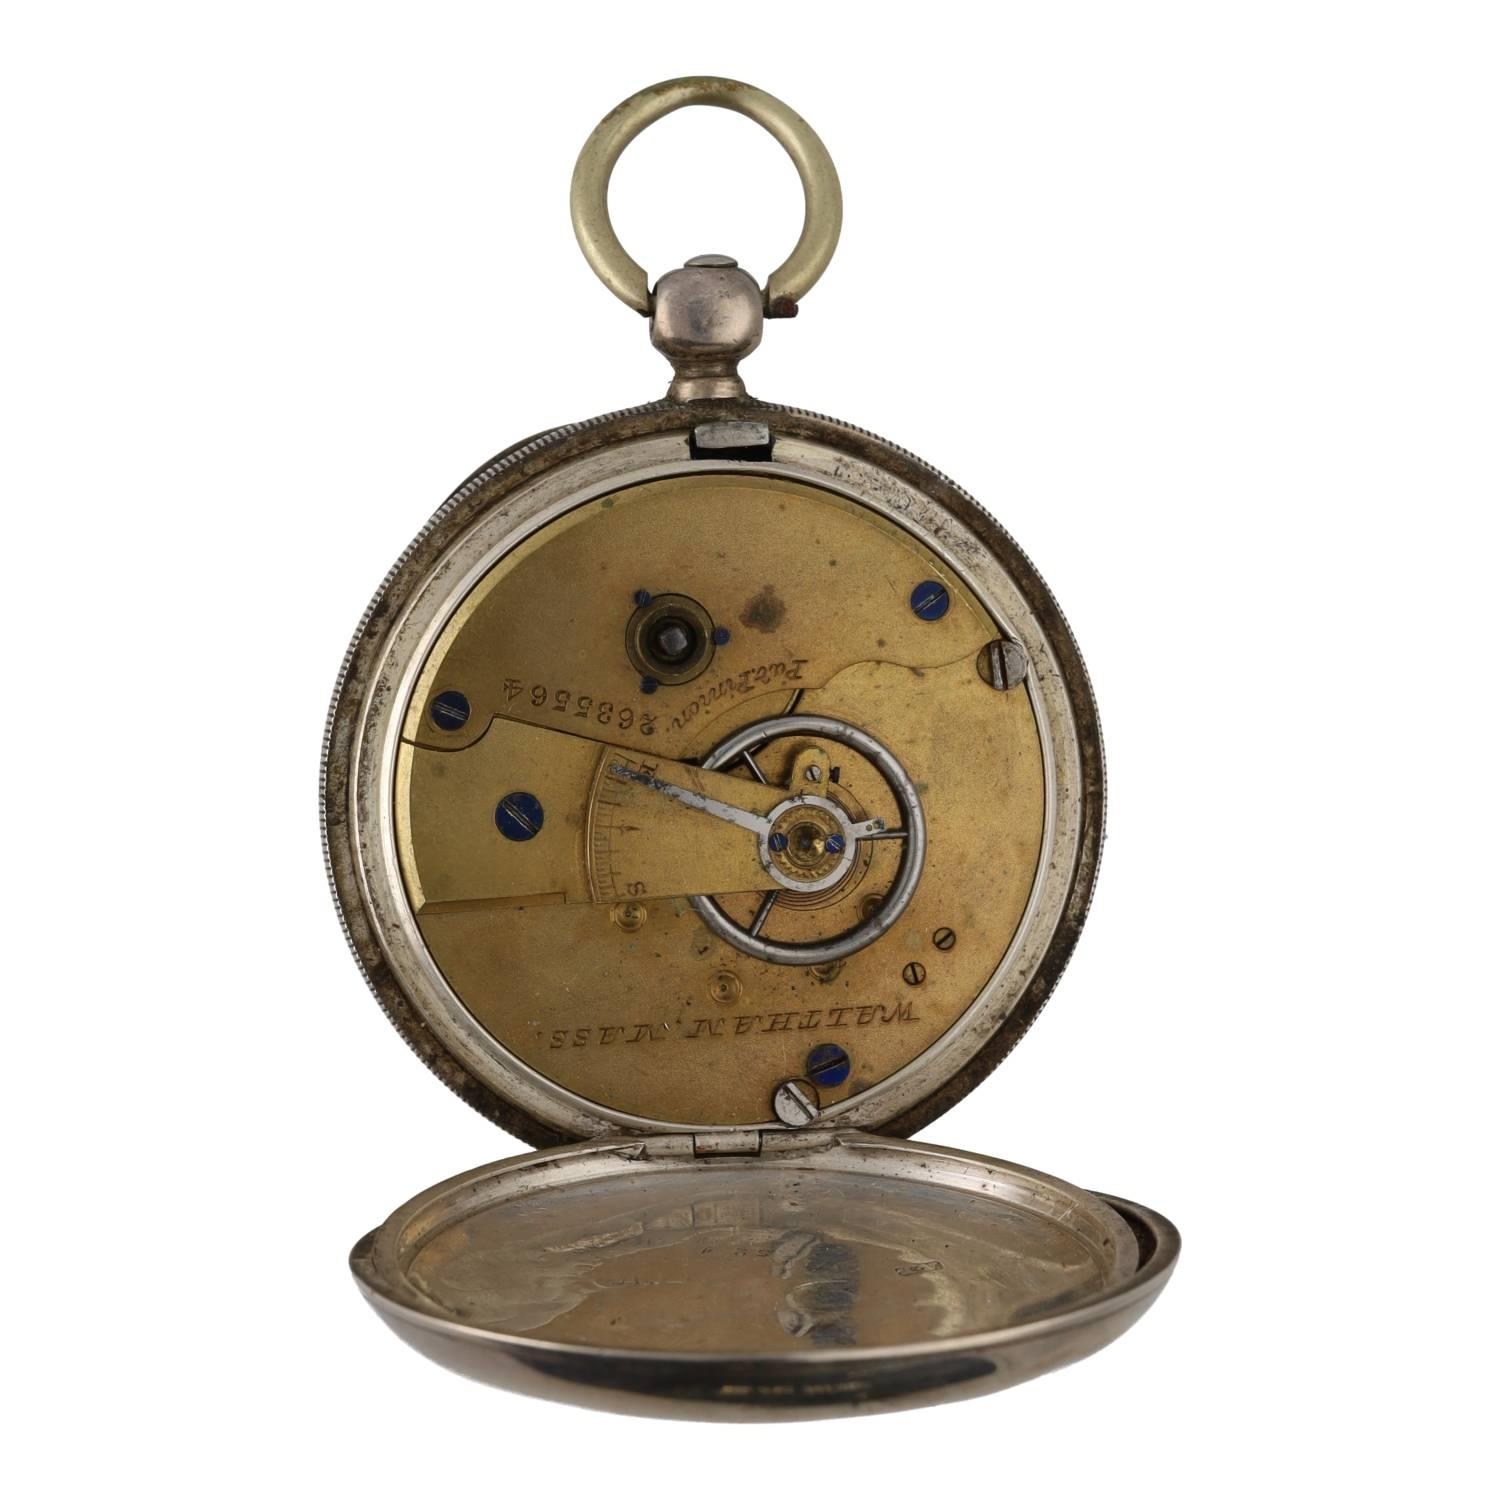 American Waltham silver lever pocket watch, circa 1884, serial no. 2635564, signed movement with - Image 2 of 3